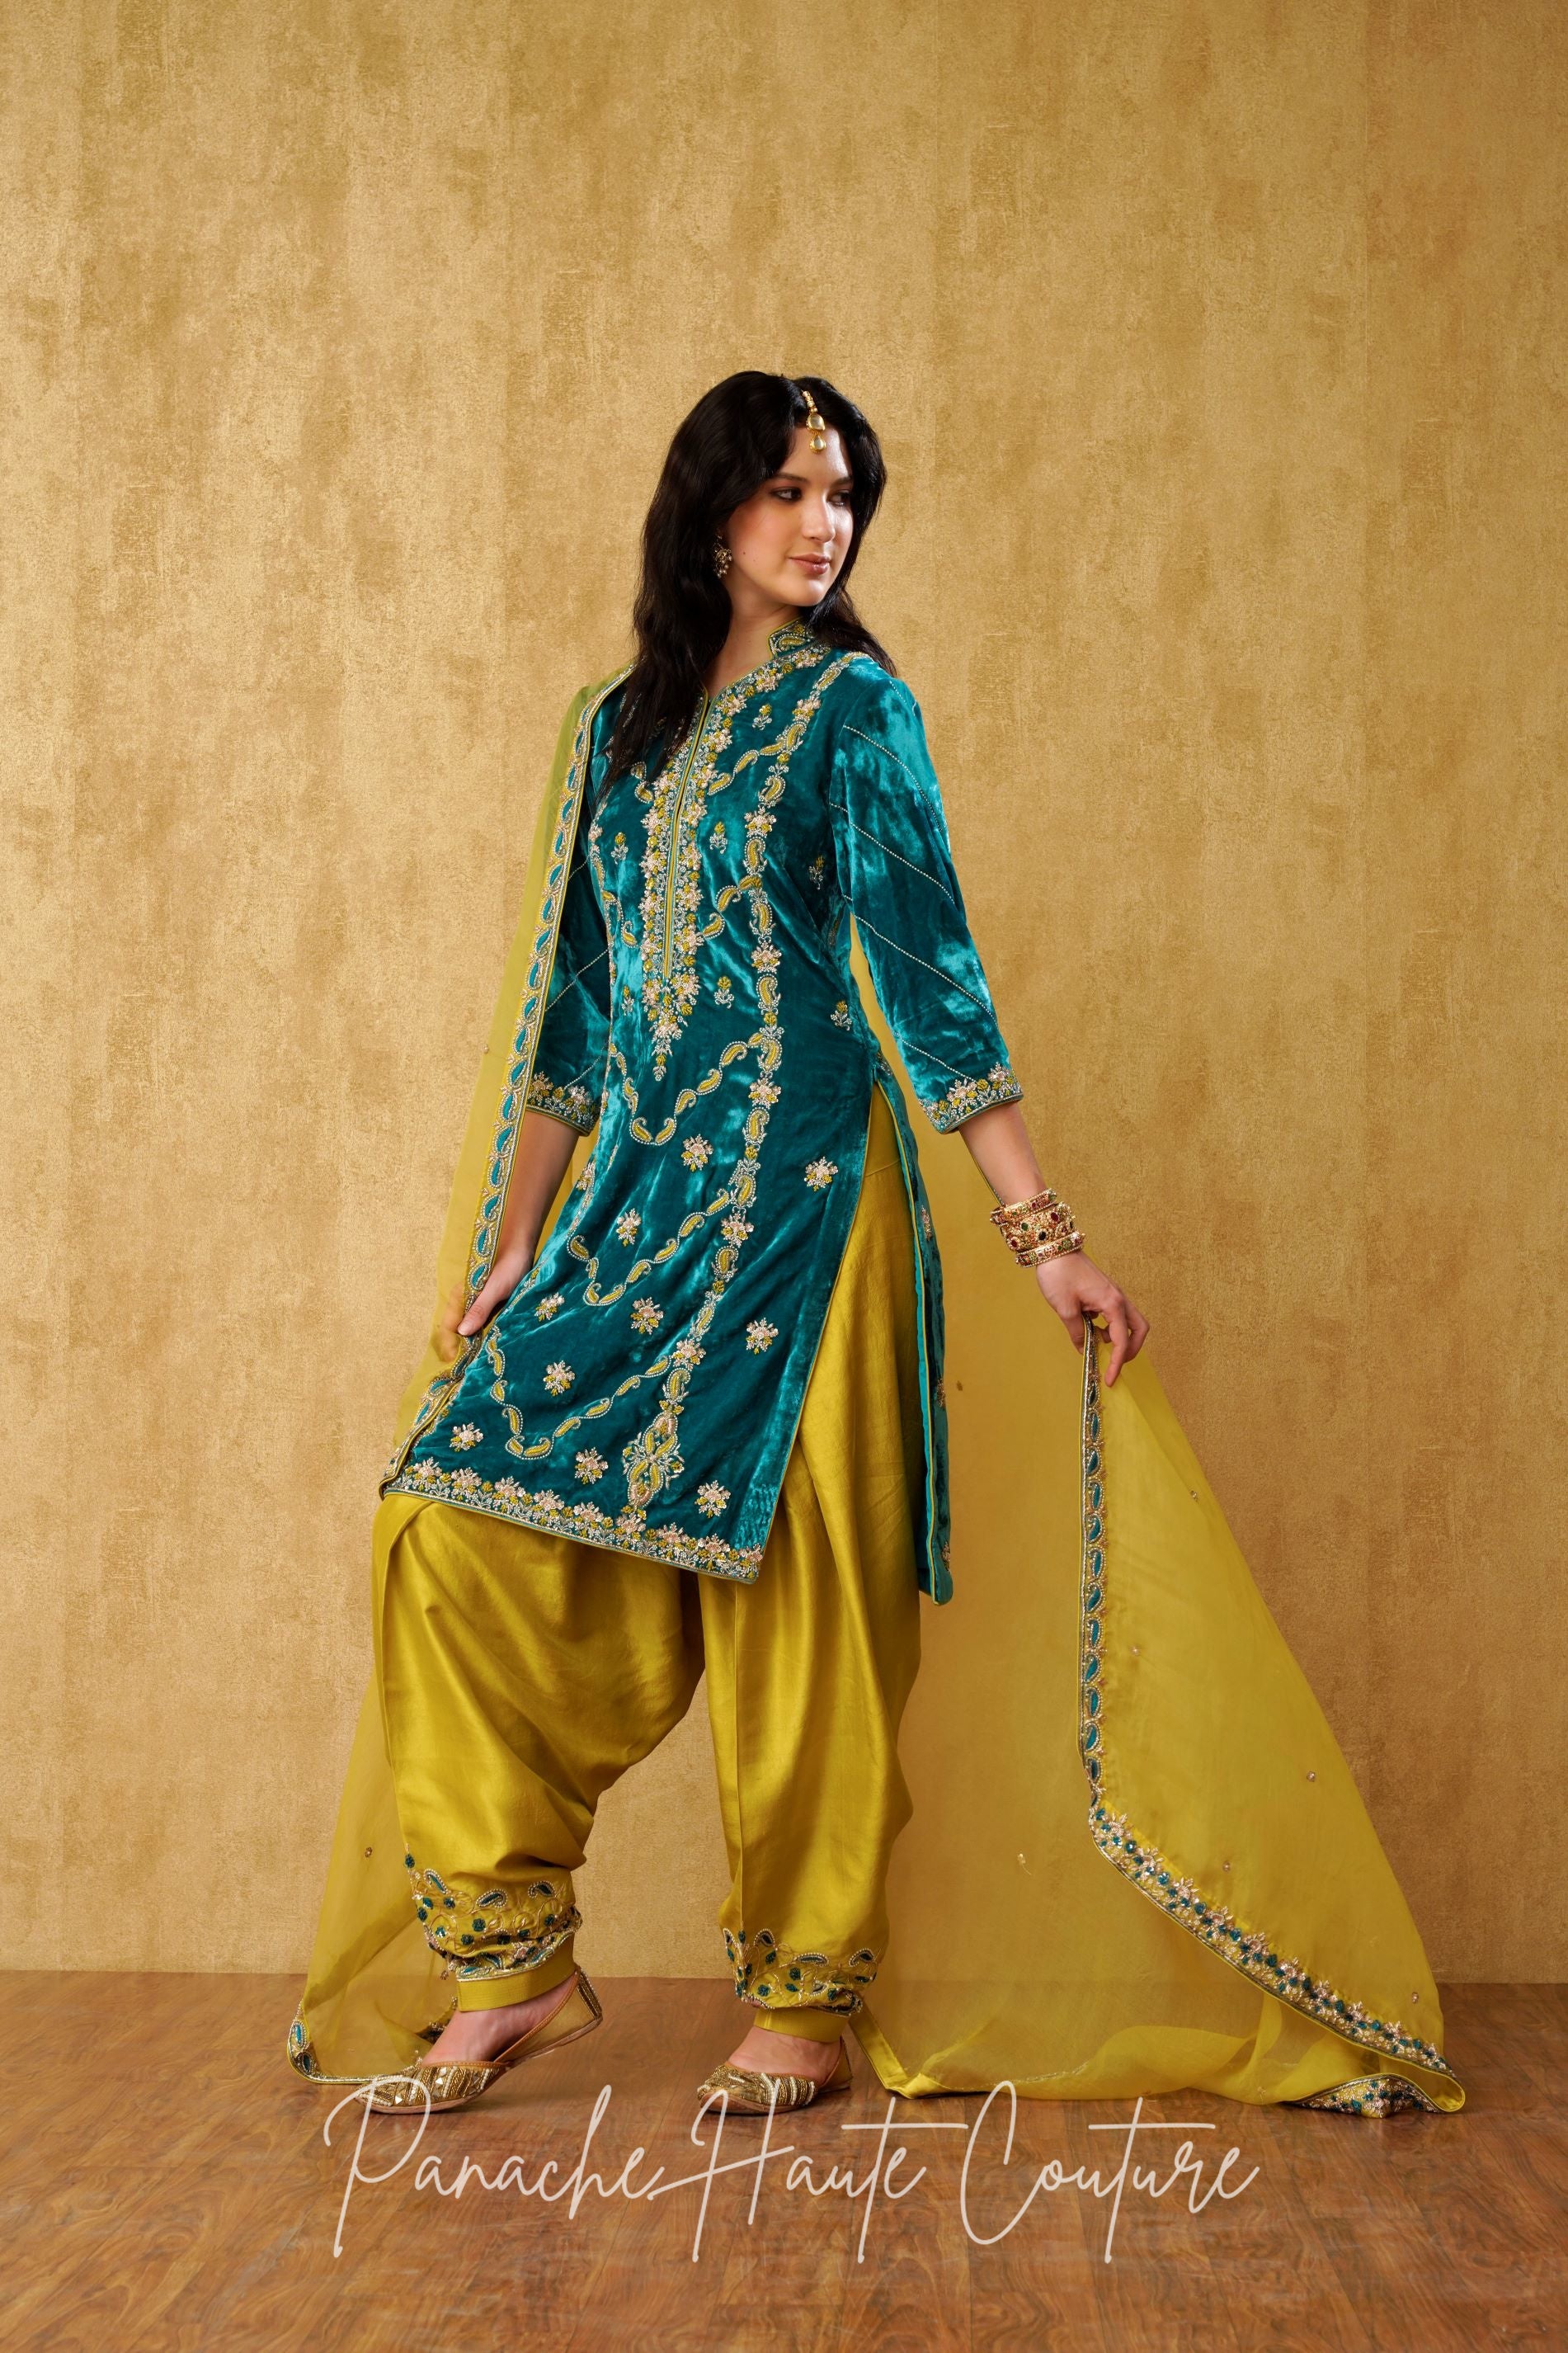 Green Velvet Suit with Hand Embroidery, Indian Ethnic Wear, Women Salwar  Suits | eBay